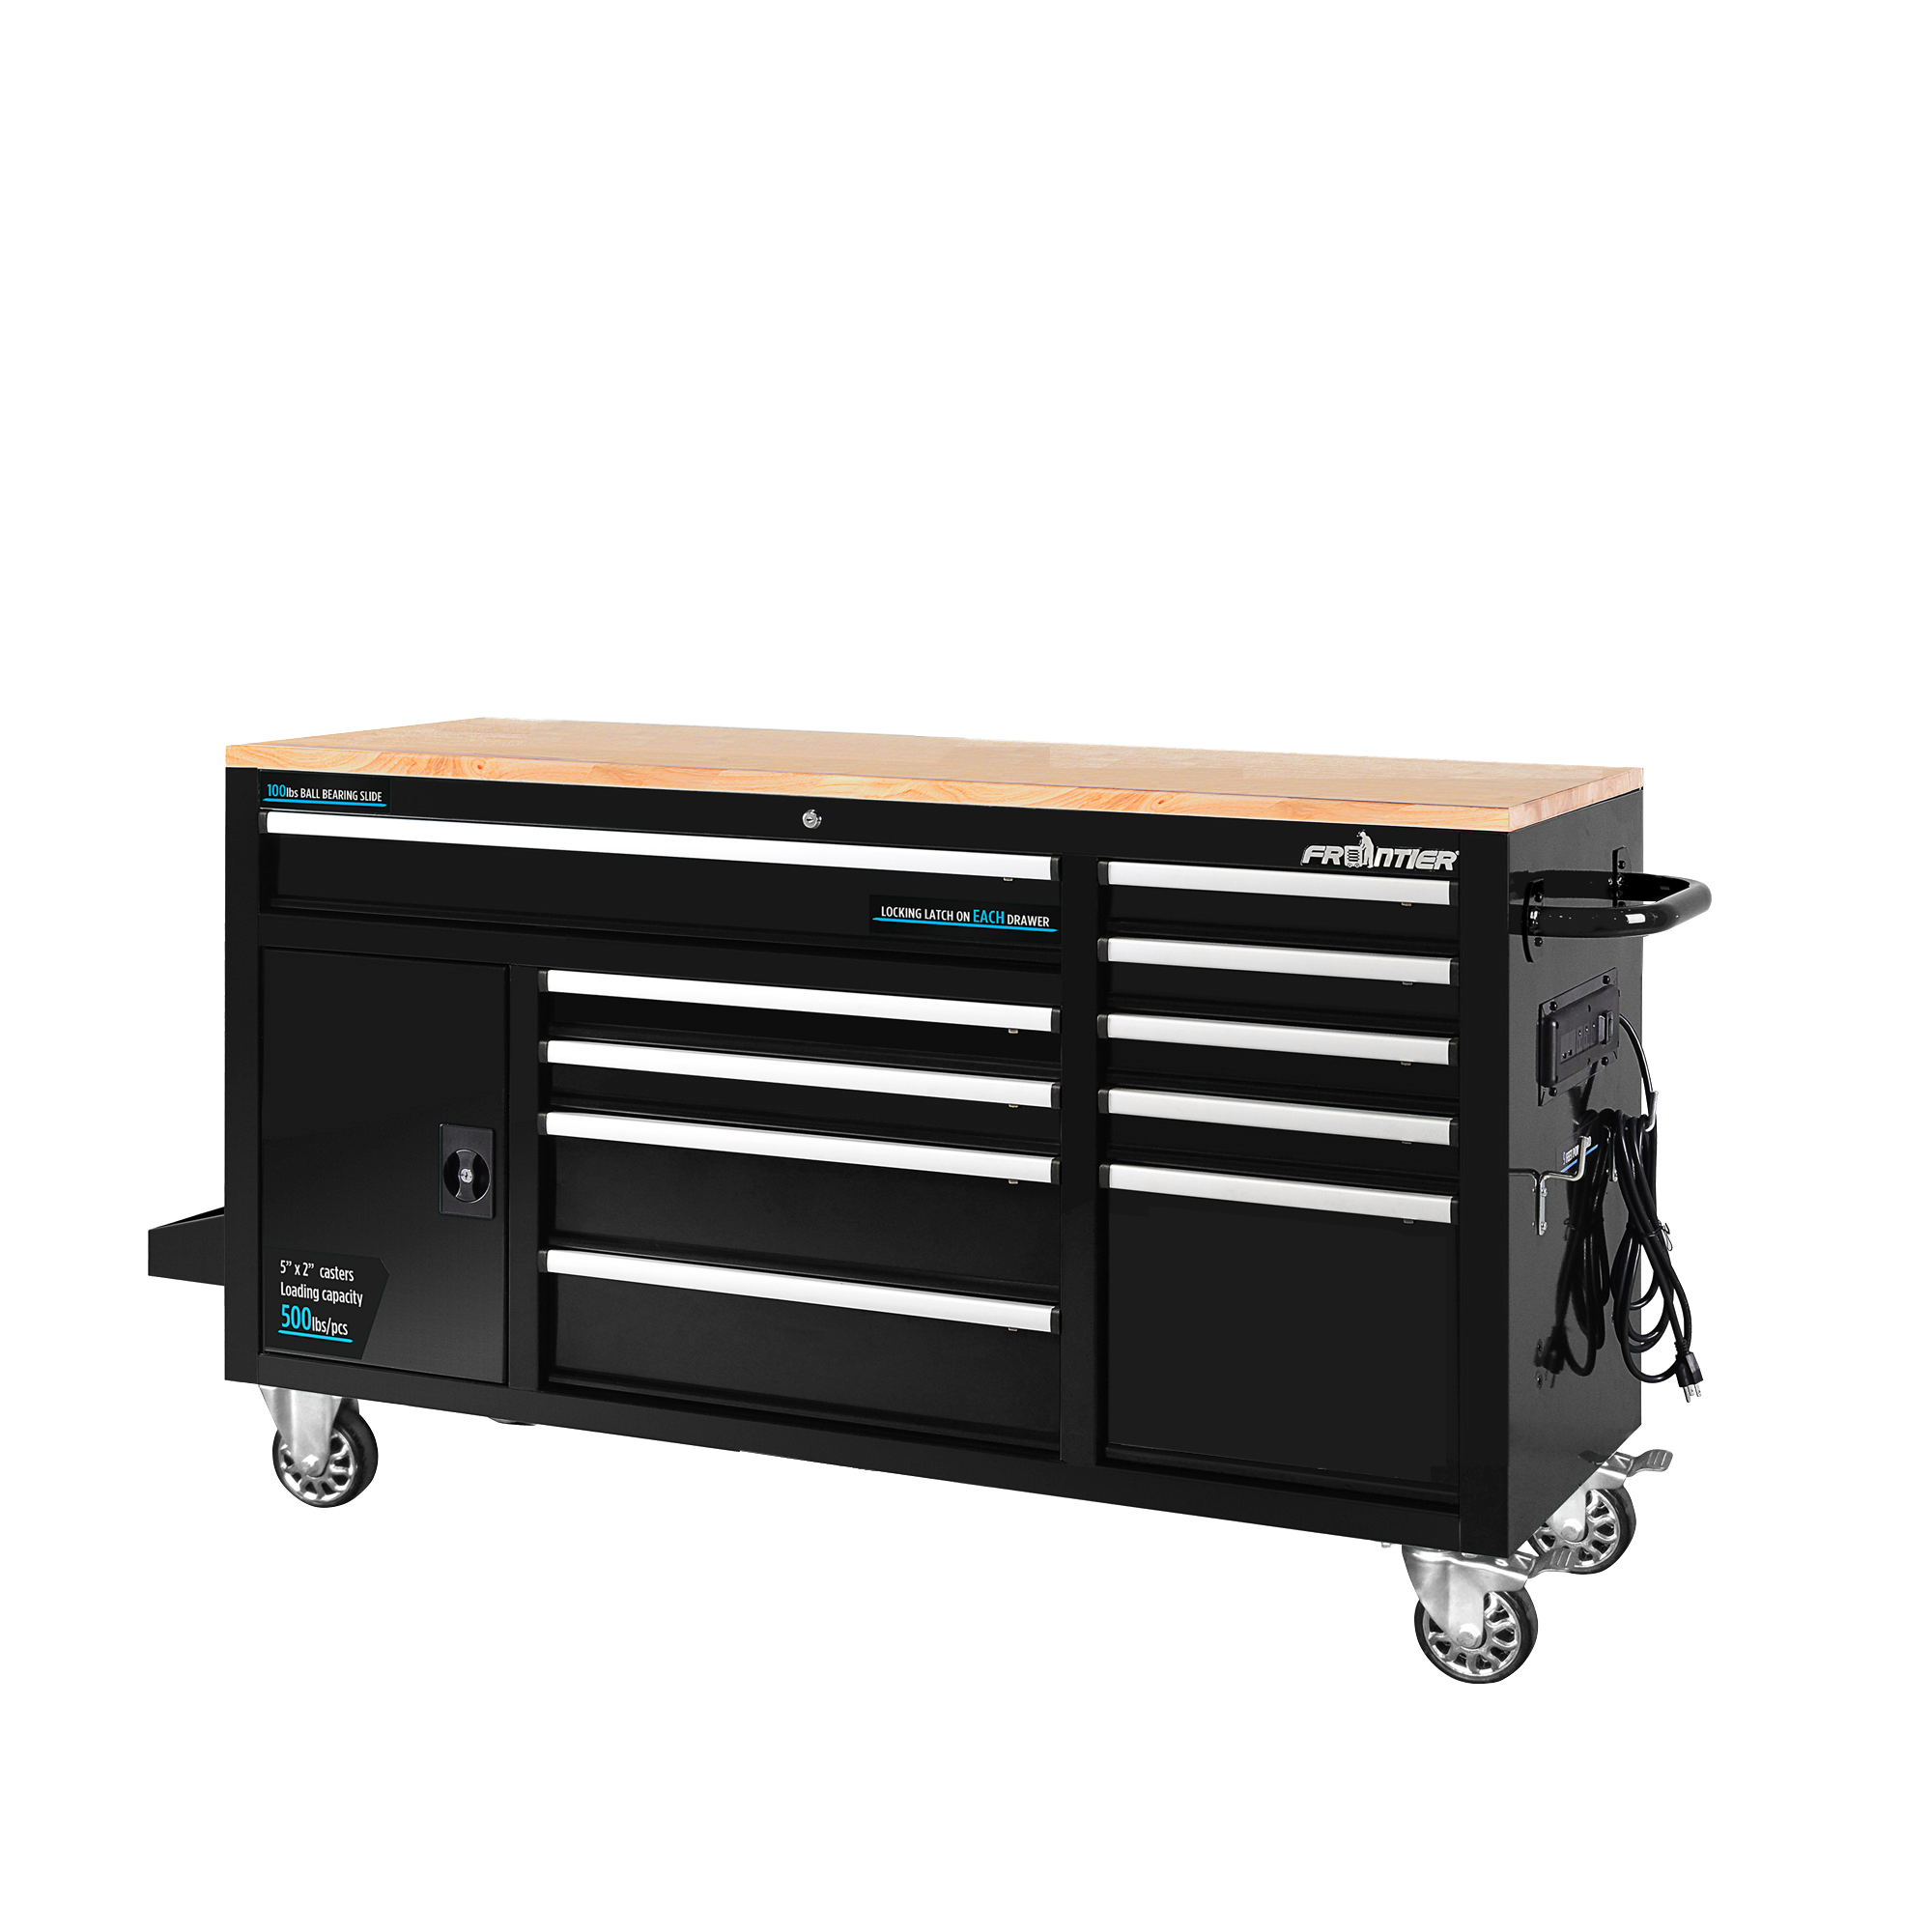 FRONTIER 62-inch W x 37-inch H x 22-inch D, Heavy Duty Mobile tool chest, tool cabinet with 10 drawers in Black - image 1 of 1